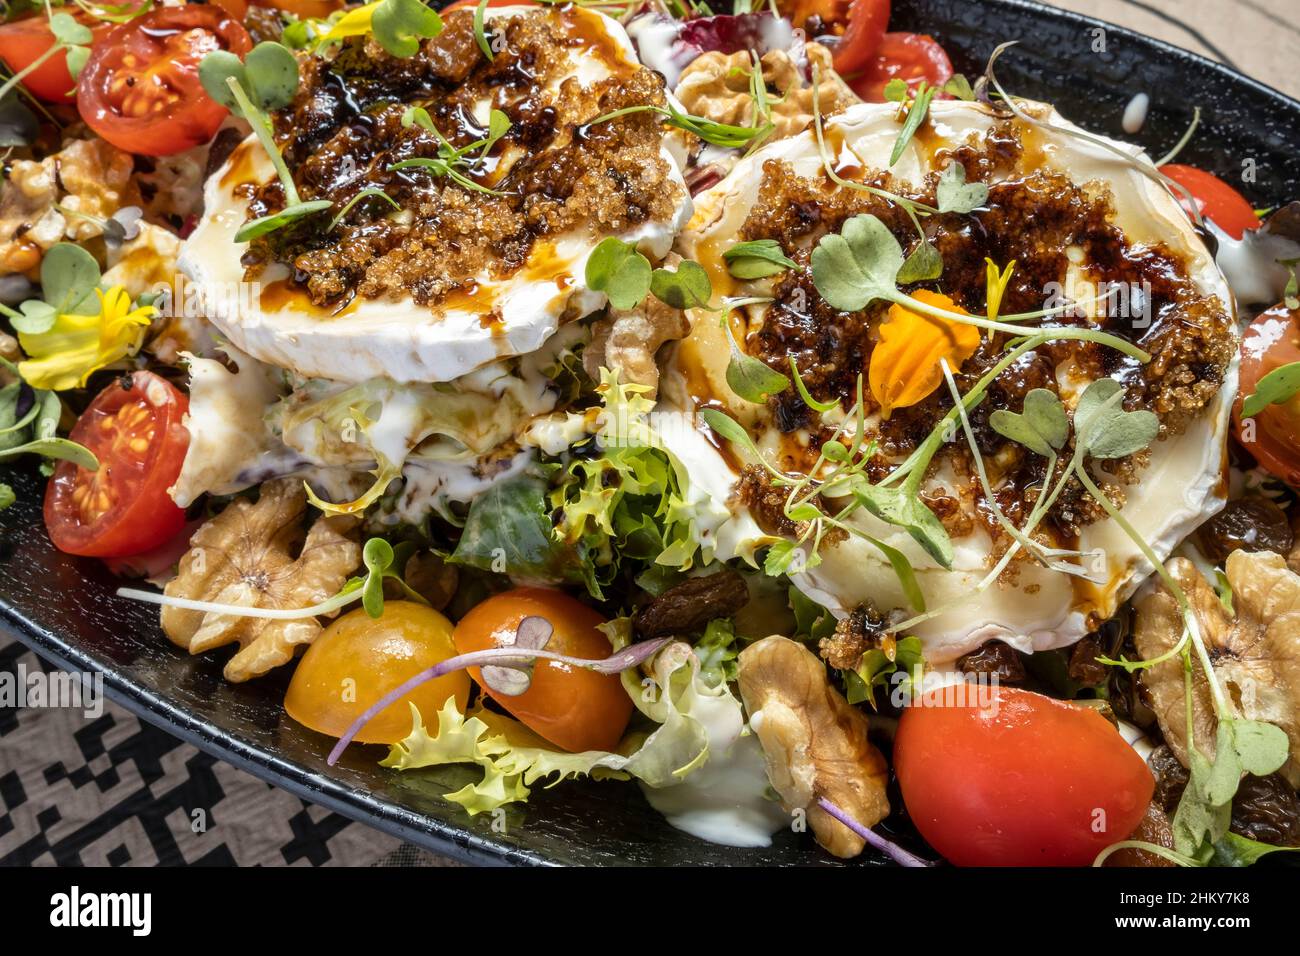 Salad with tomato, walnuts and goat cheese Stock Photo